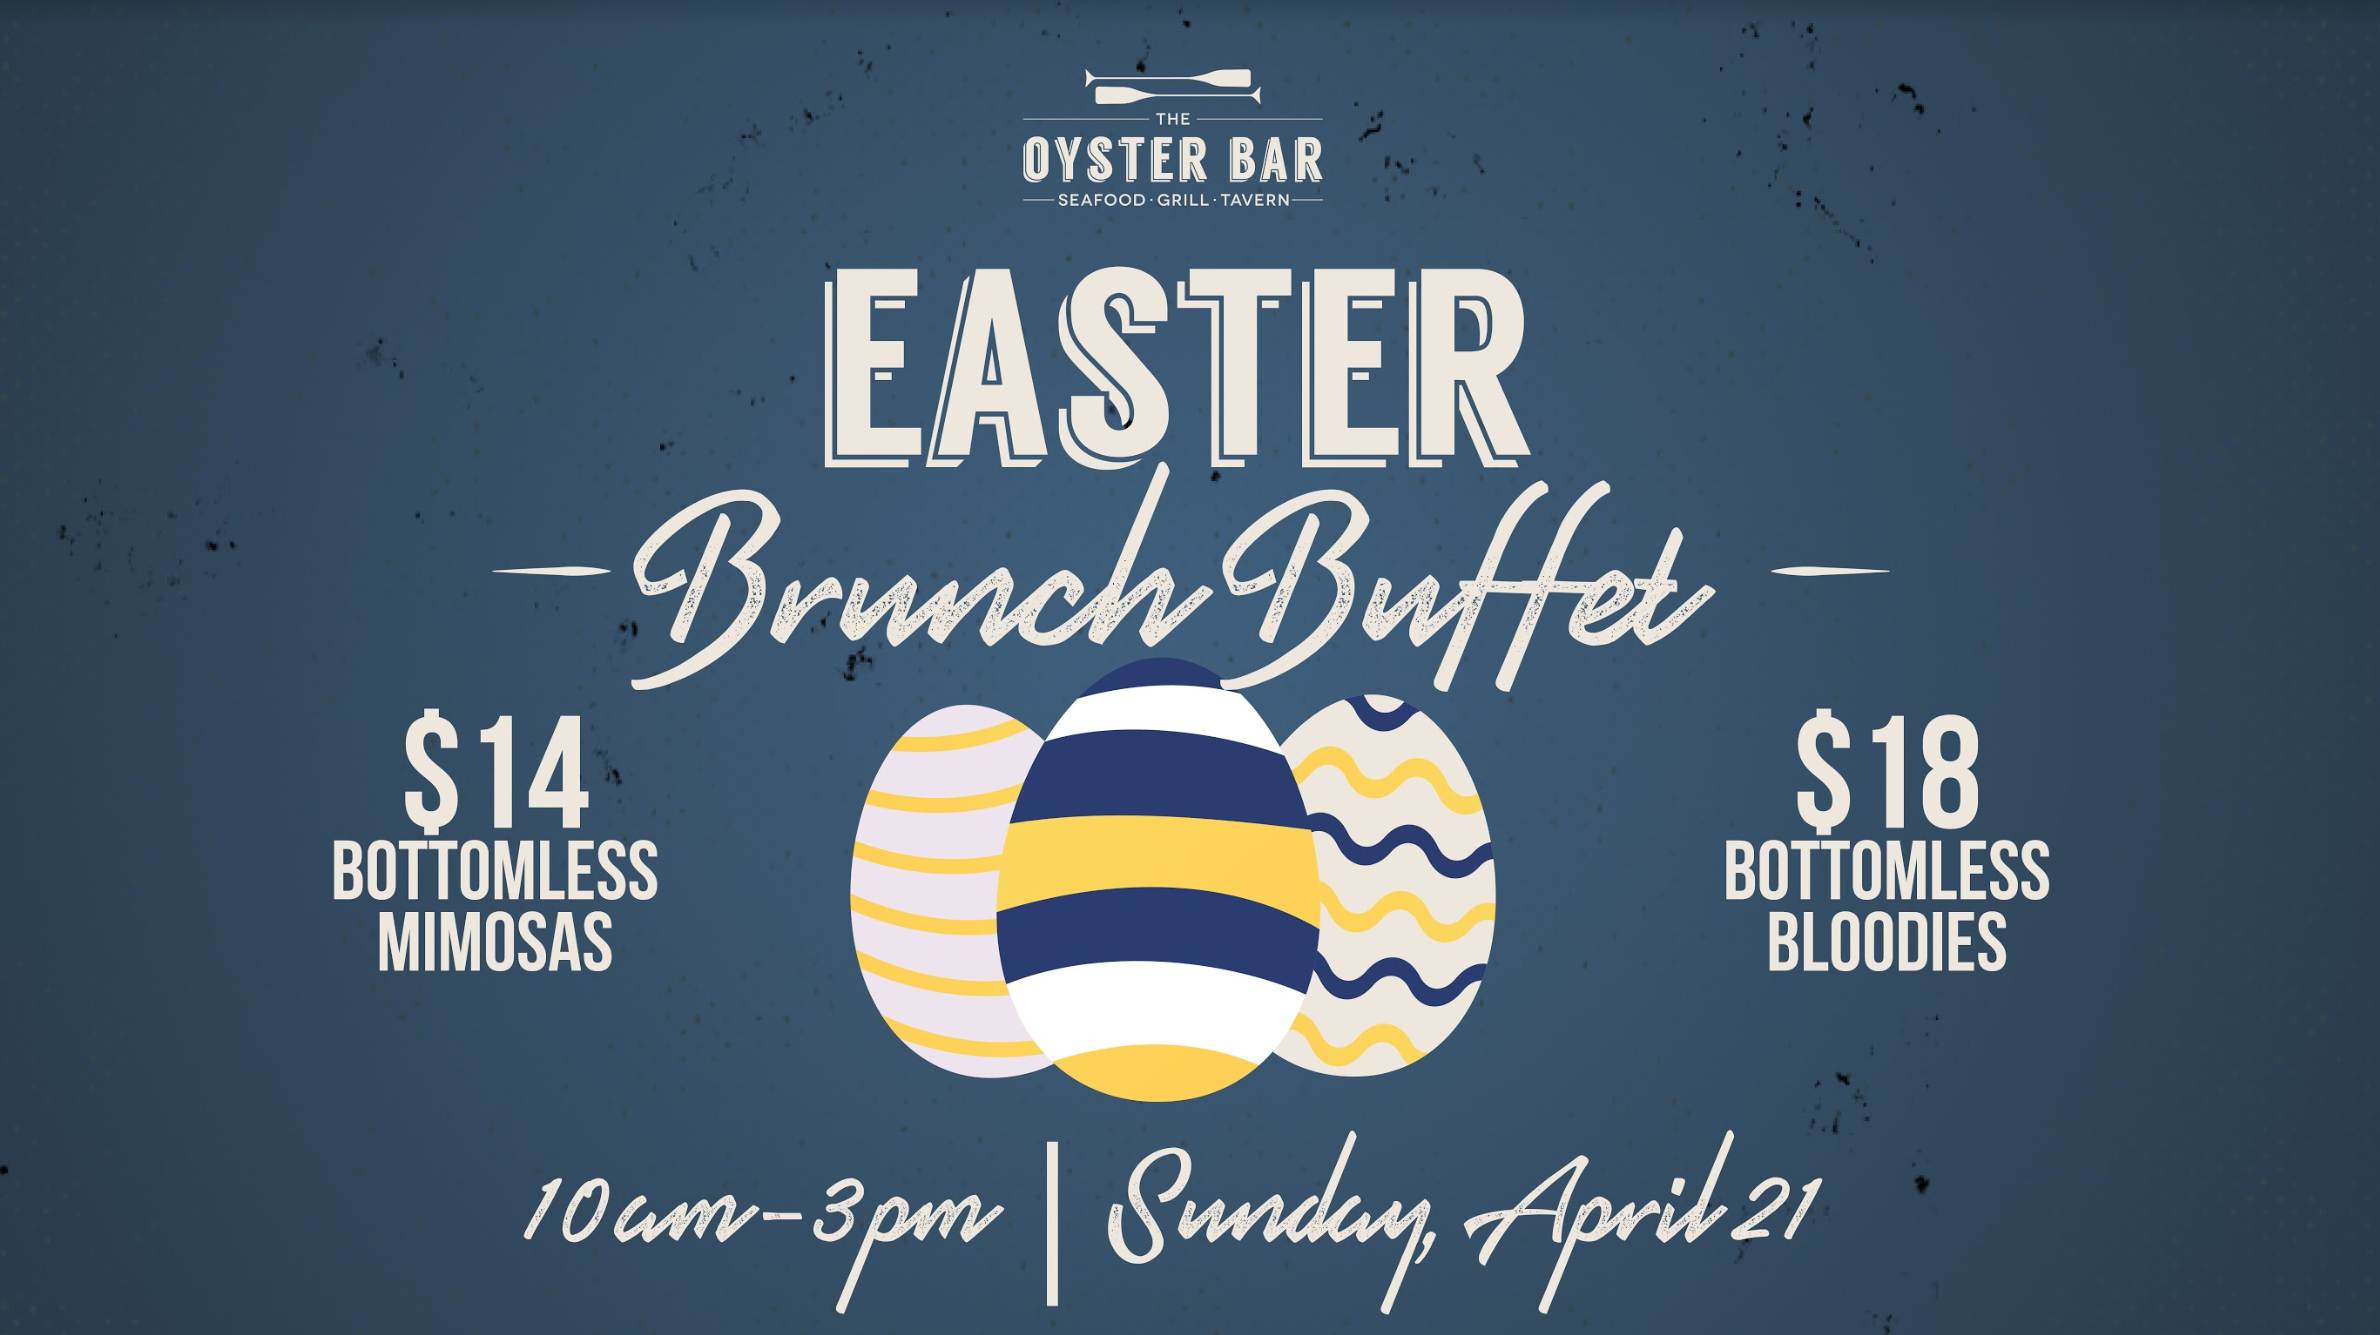 The Oyster Bar to Feature Brunch & Bubbly this Easter